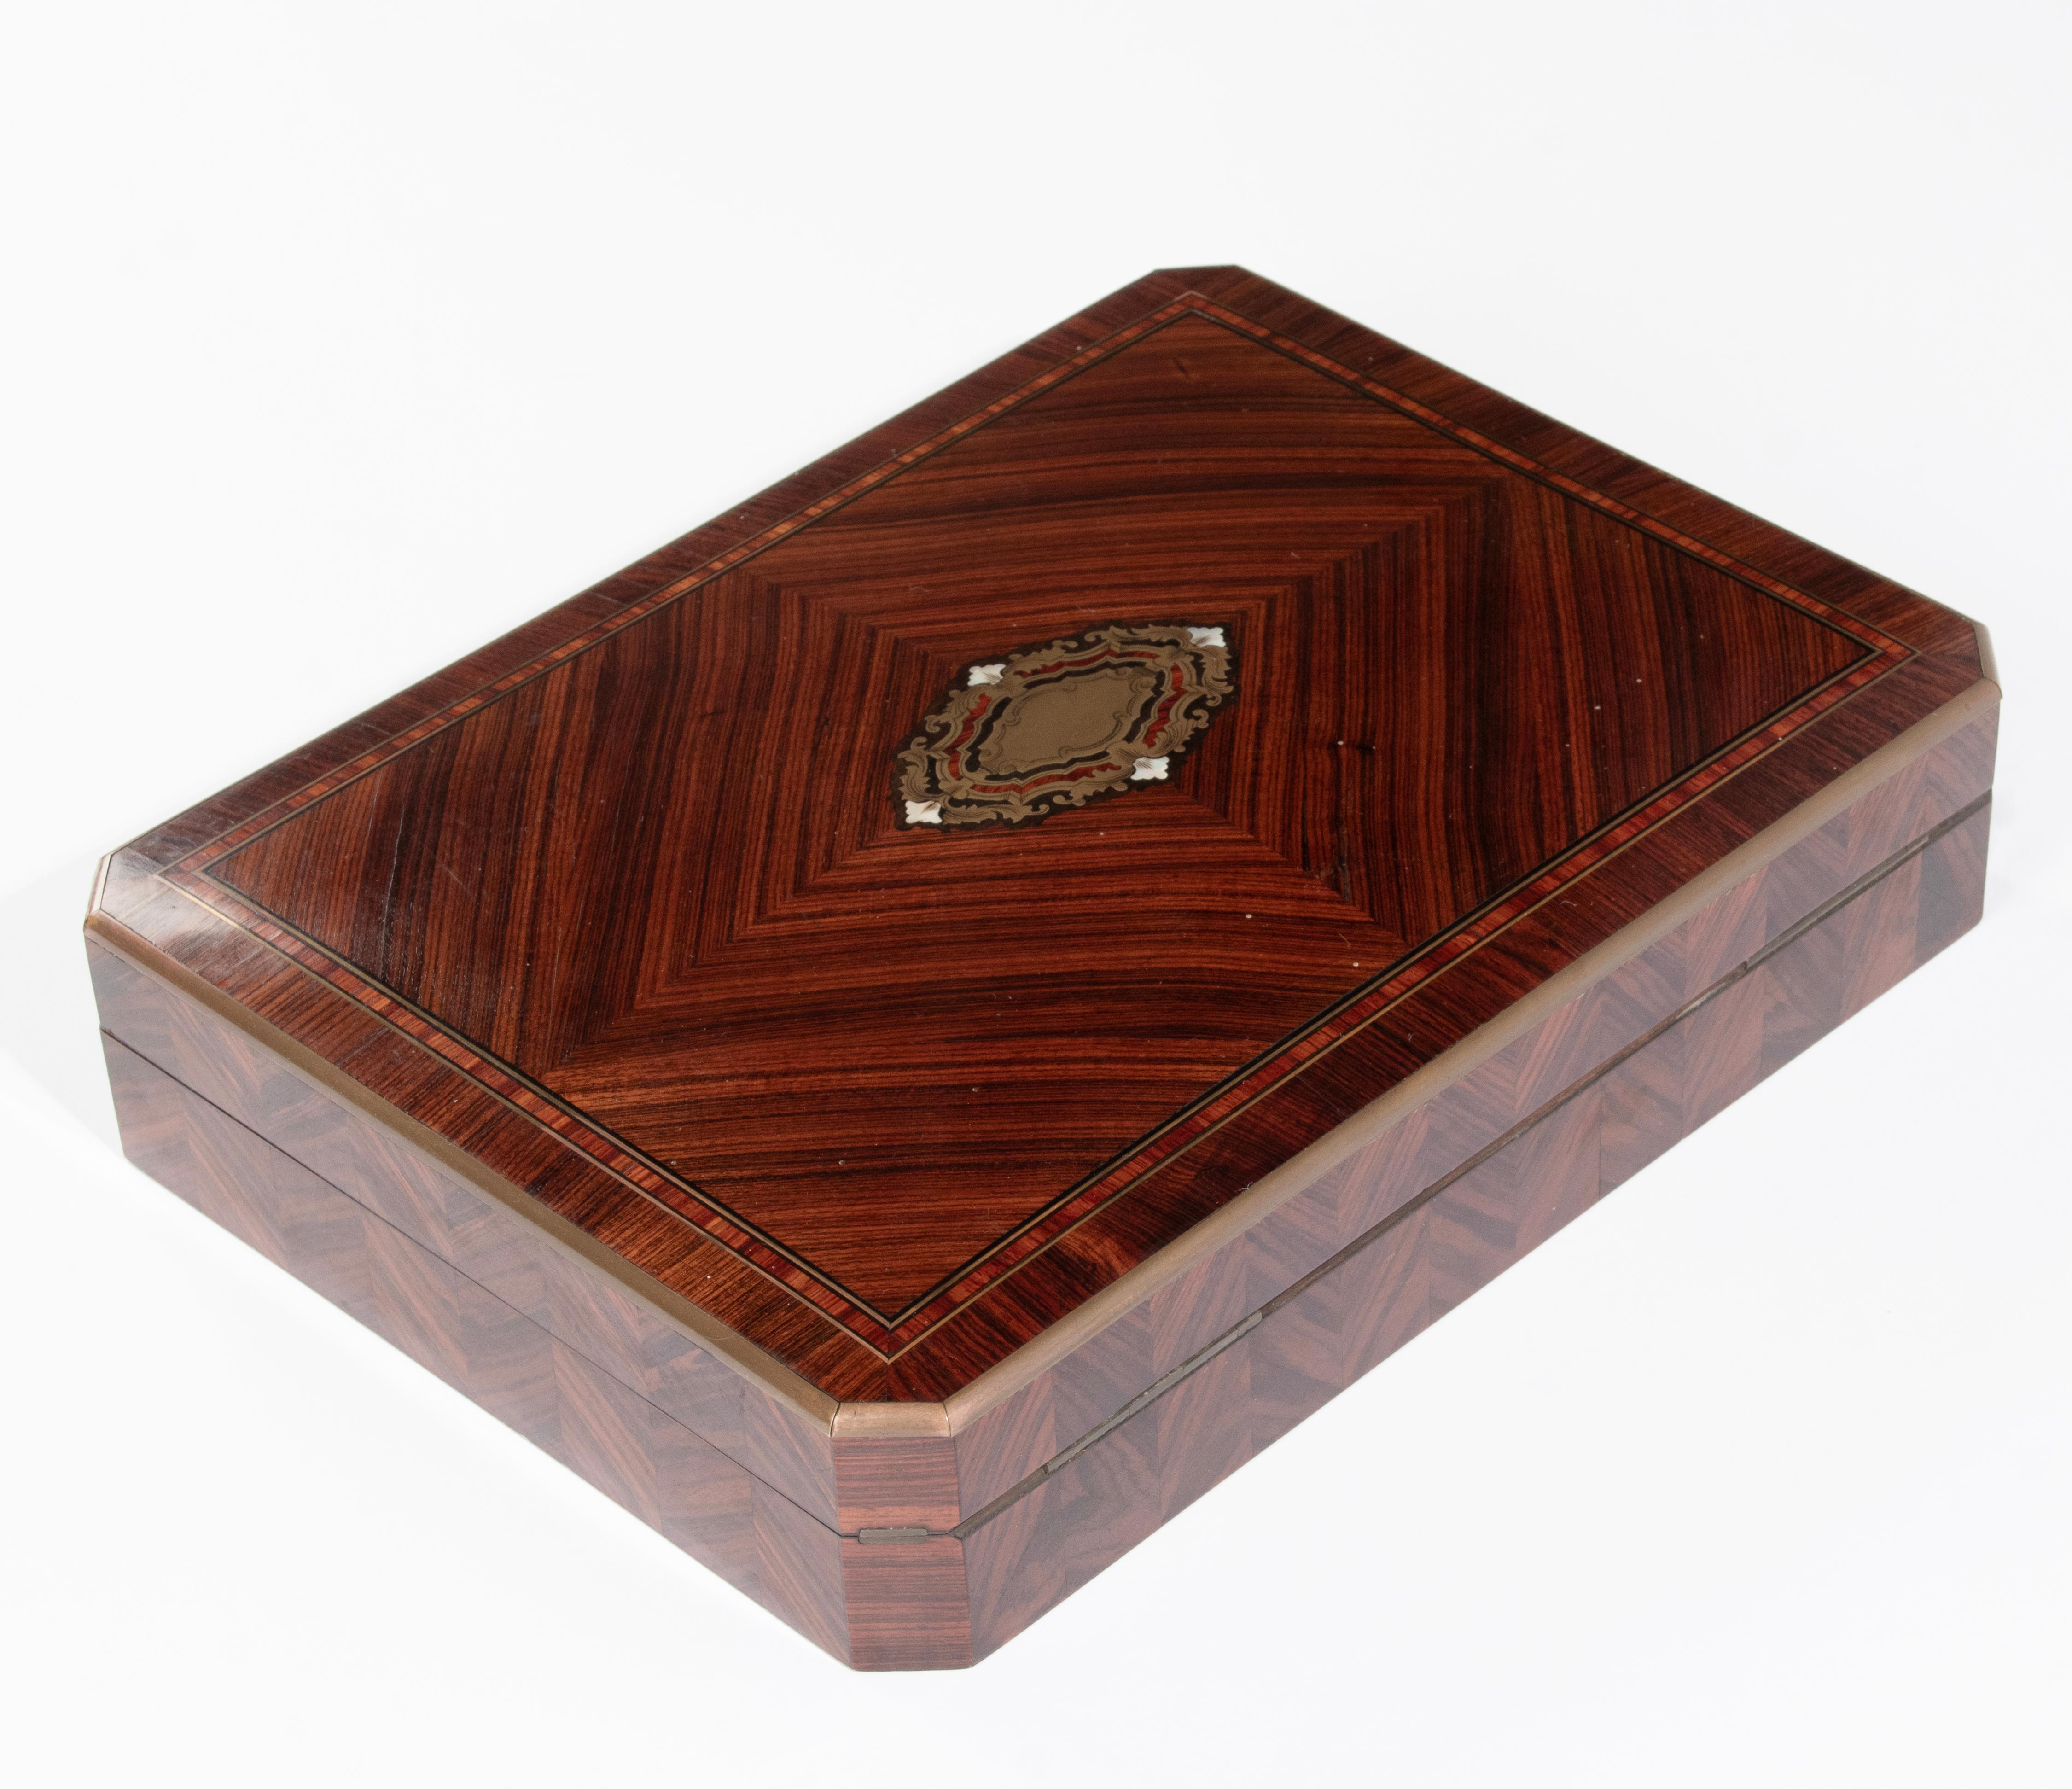 Beautiful antique game box from the French Napoleon III period. The box is made of book veneer match, inlaid with brass trims. This box shows the fine craftsmanship of the ebenist who made the box. The interior has compartments for chips and cards.